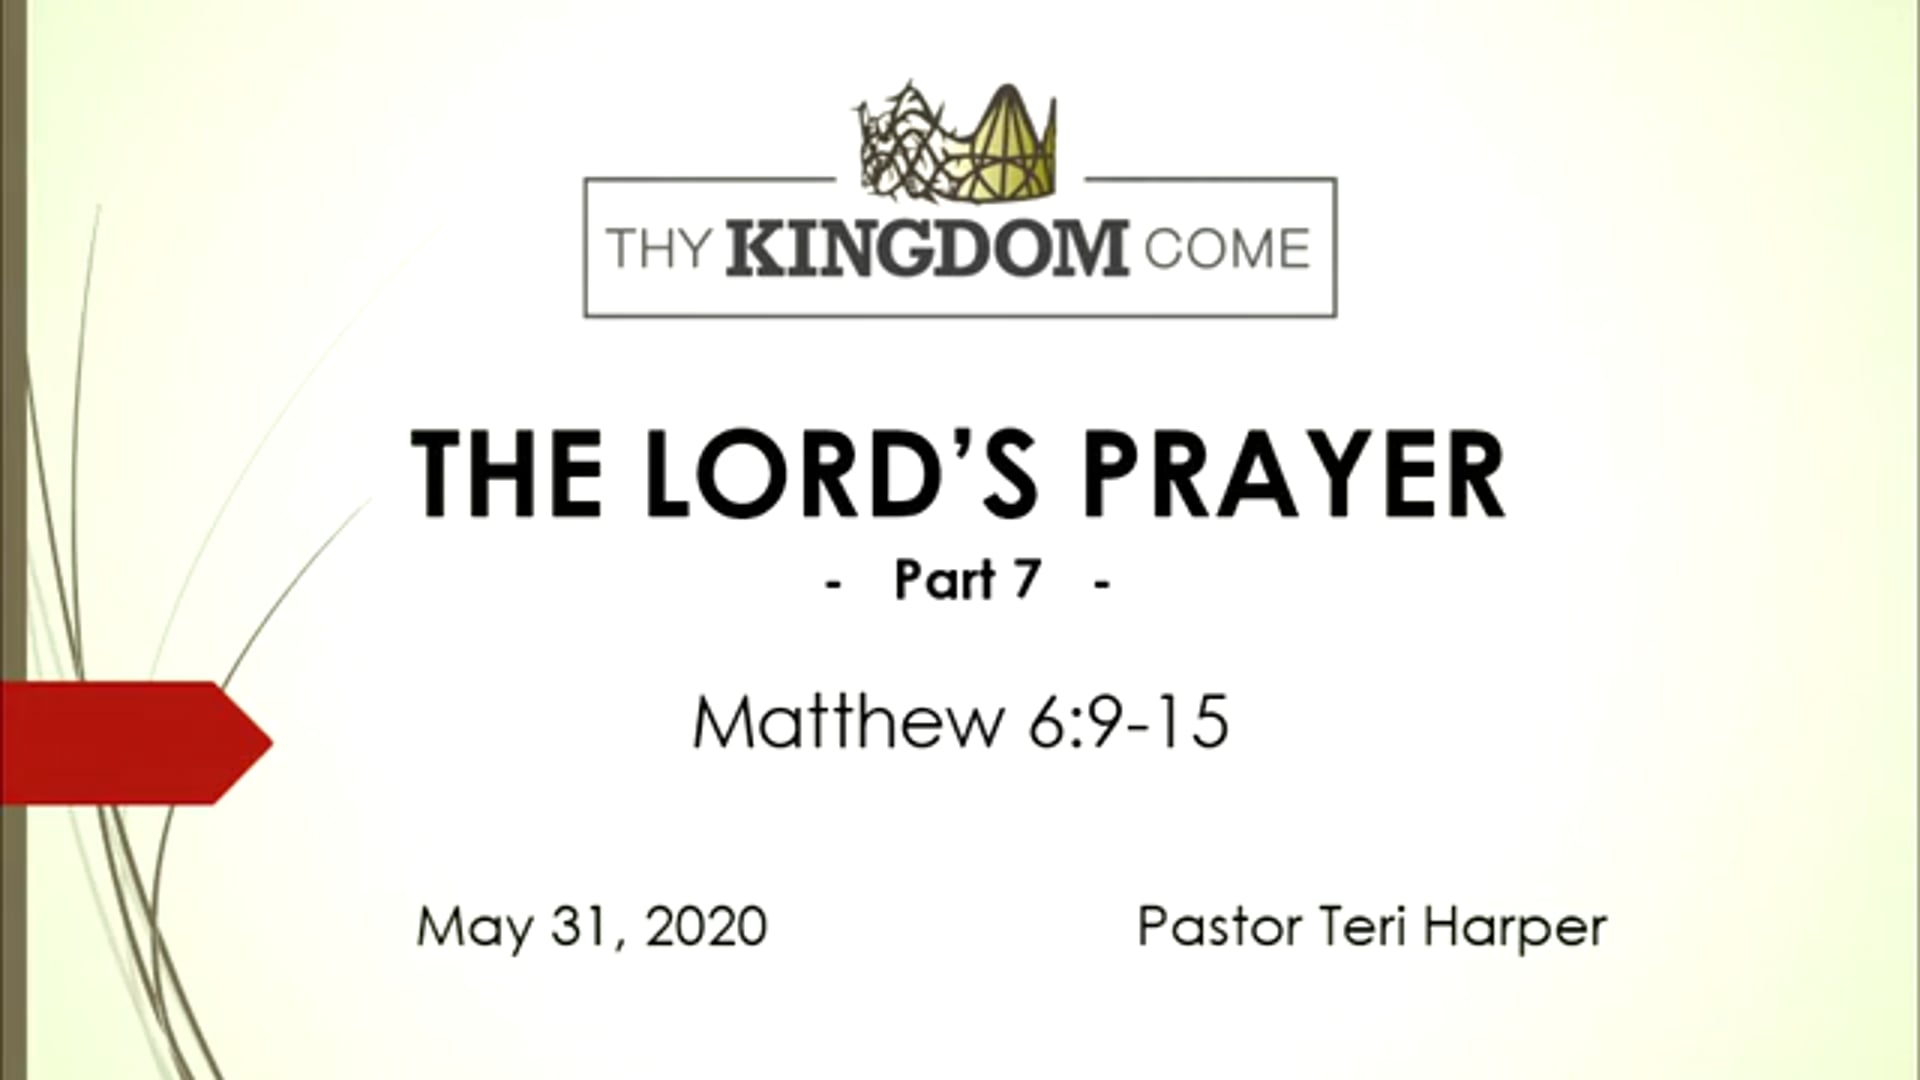 5-31, The Lord's Prayer, Part 7